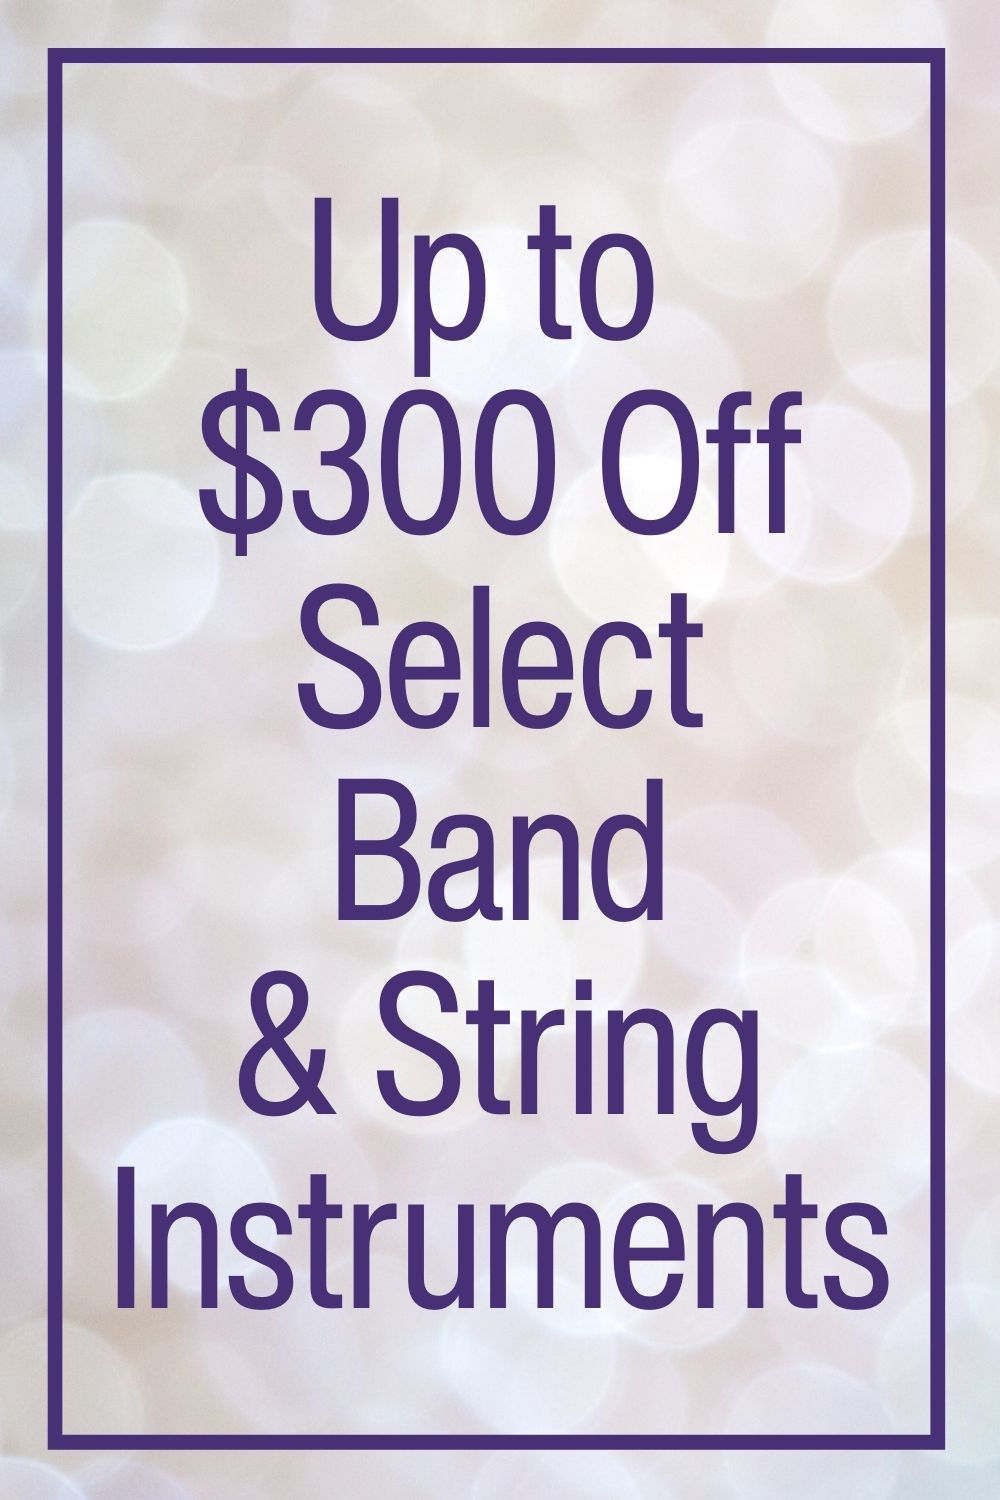 Tremendous Discounts Await! Enjoy a Triad of Rebates on Yamaha's Carefully Chosen Wind and String Instruments Exclusively at Heid Music. Mark your calendars for the Appleton event on November 11th, followed by Green Bay and Oshkosh events on November 18th, and Madison/Stevens Point on December 2nd. These are monumental savings that simply can't be missed! Act promptly to secure your savings. Why wait? Schedule an appointment today to experience the magic of your prospective new instrument firsthand.